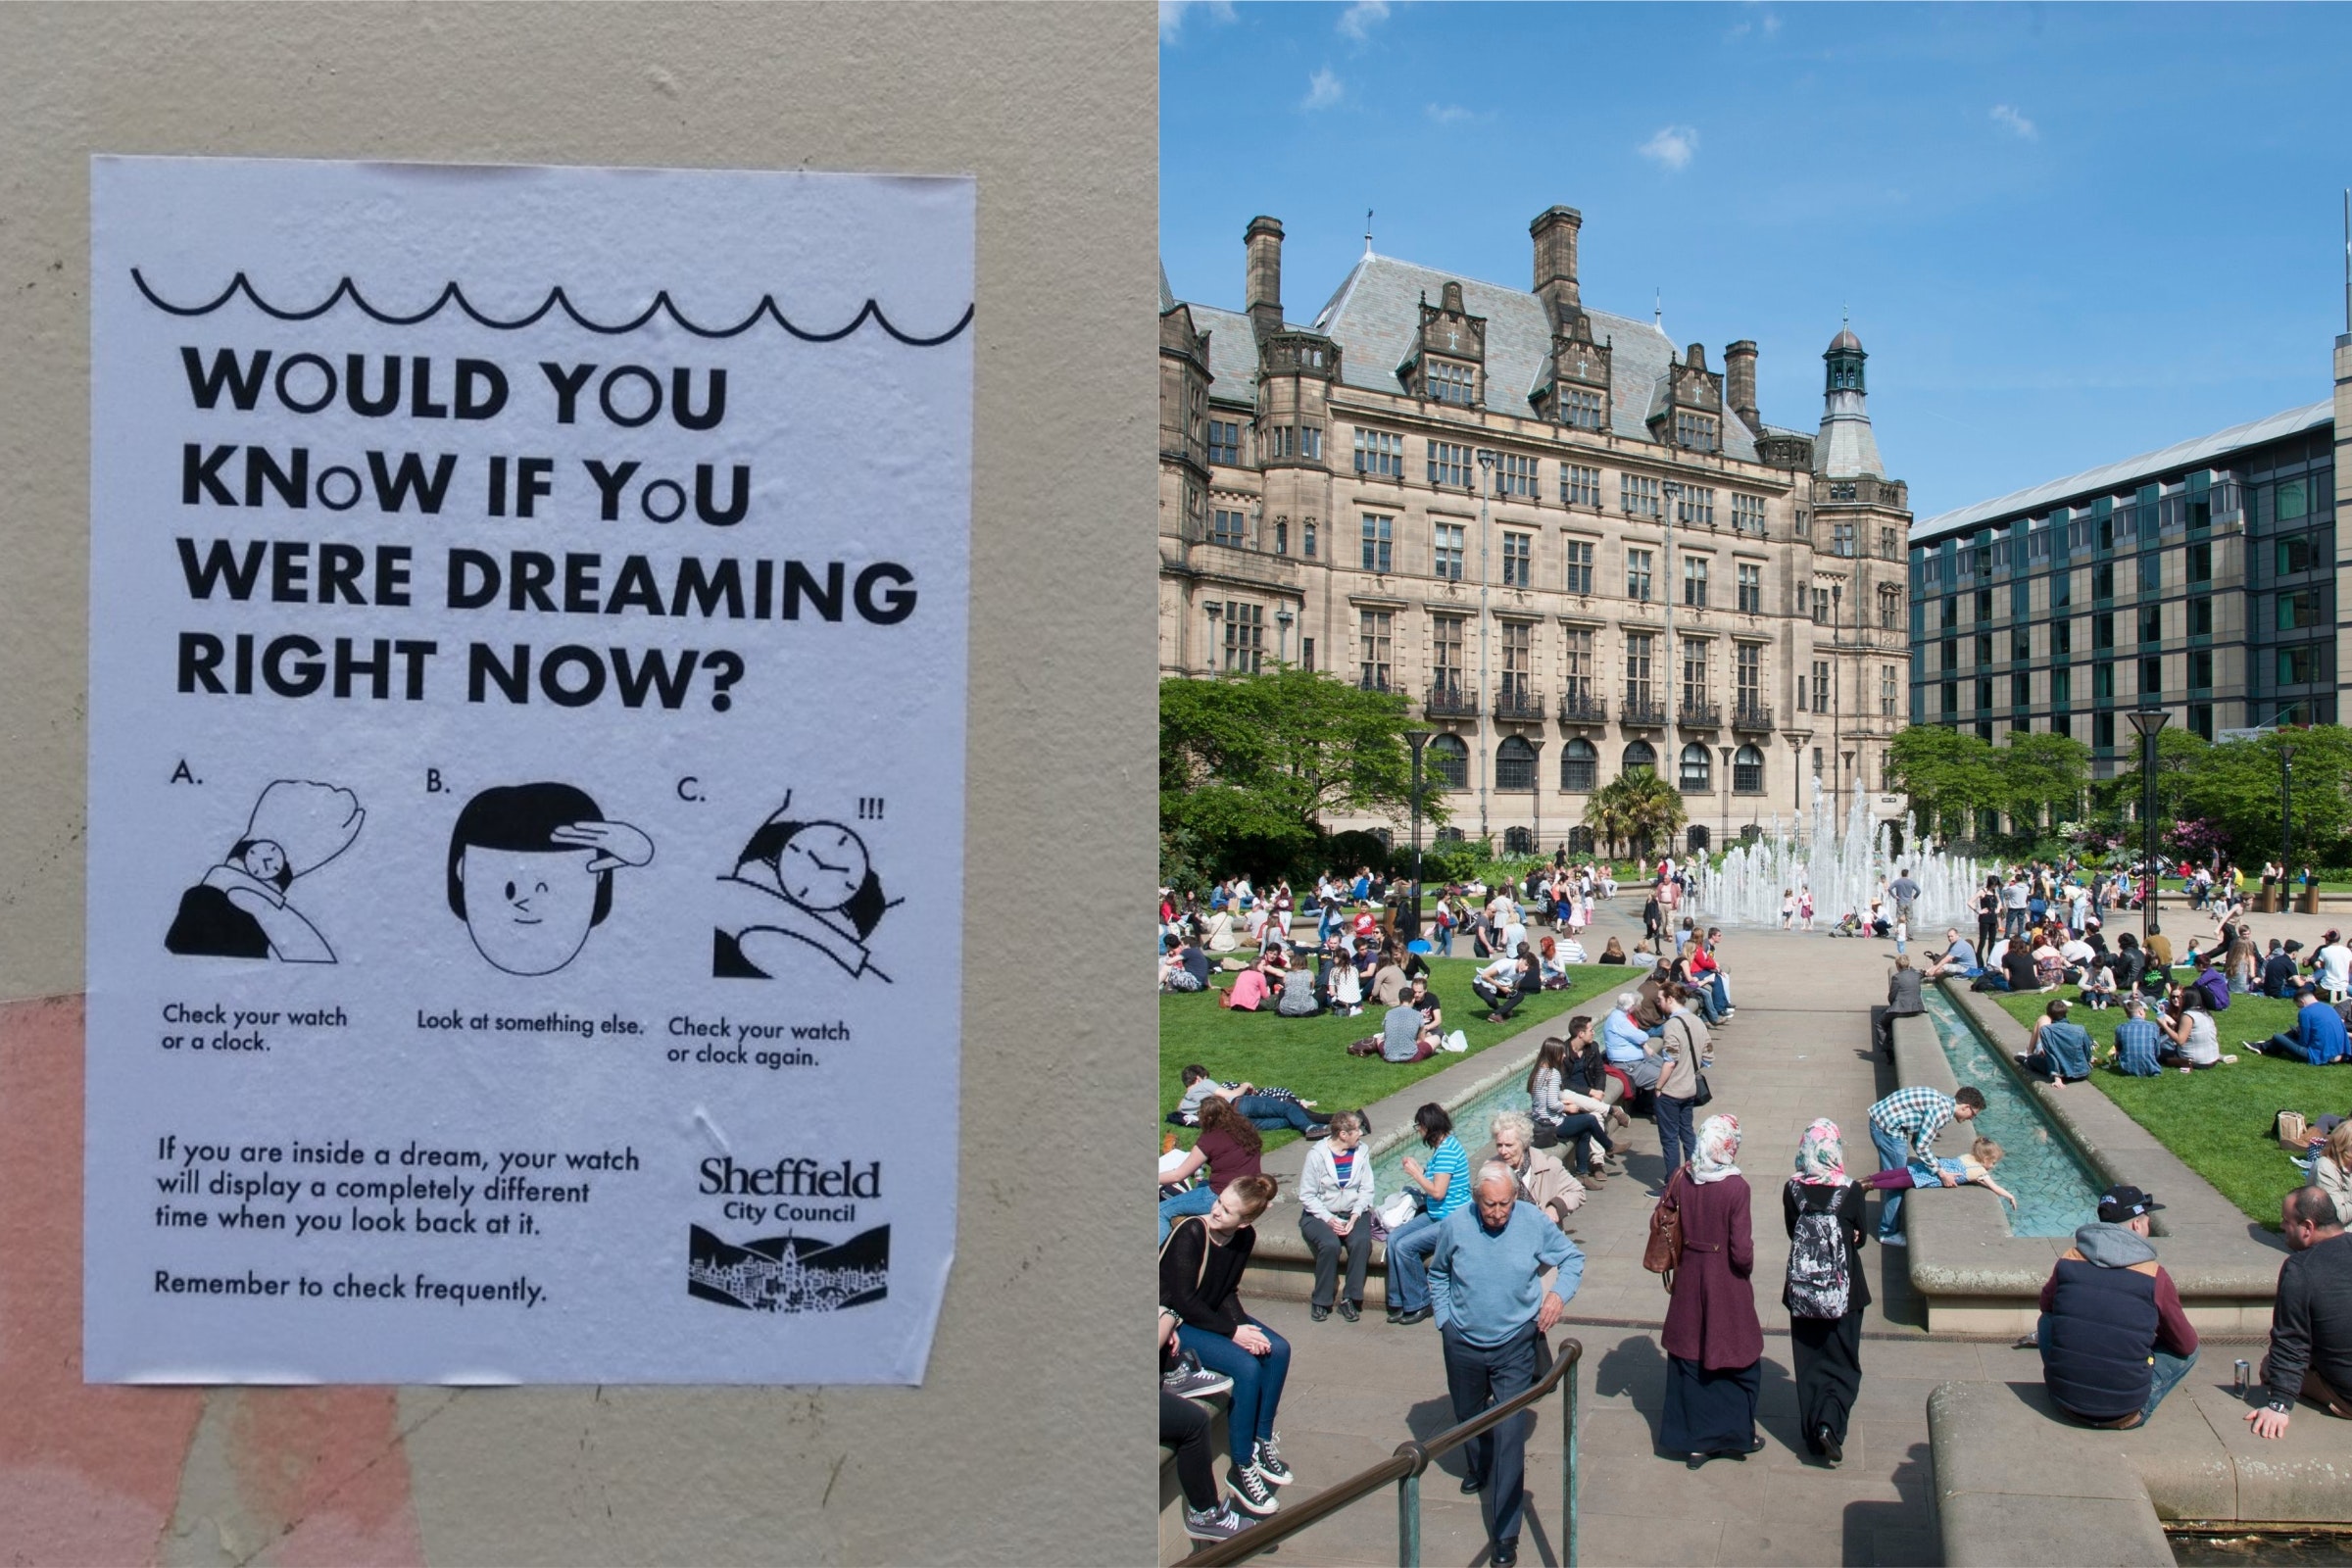 Would You Know If You Were Dreaming Mysterious Posters Appear